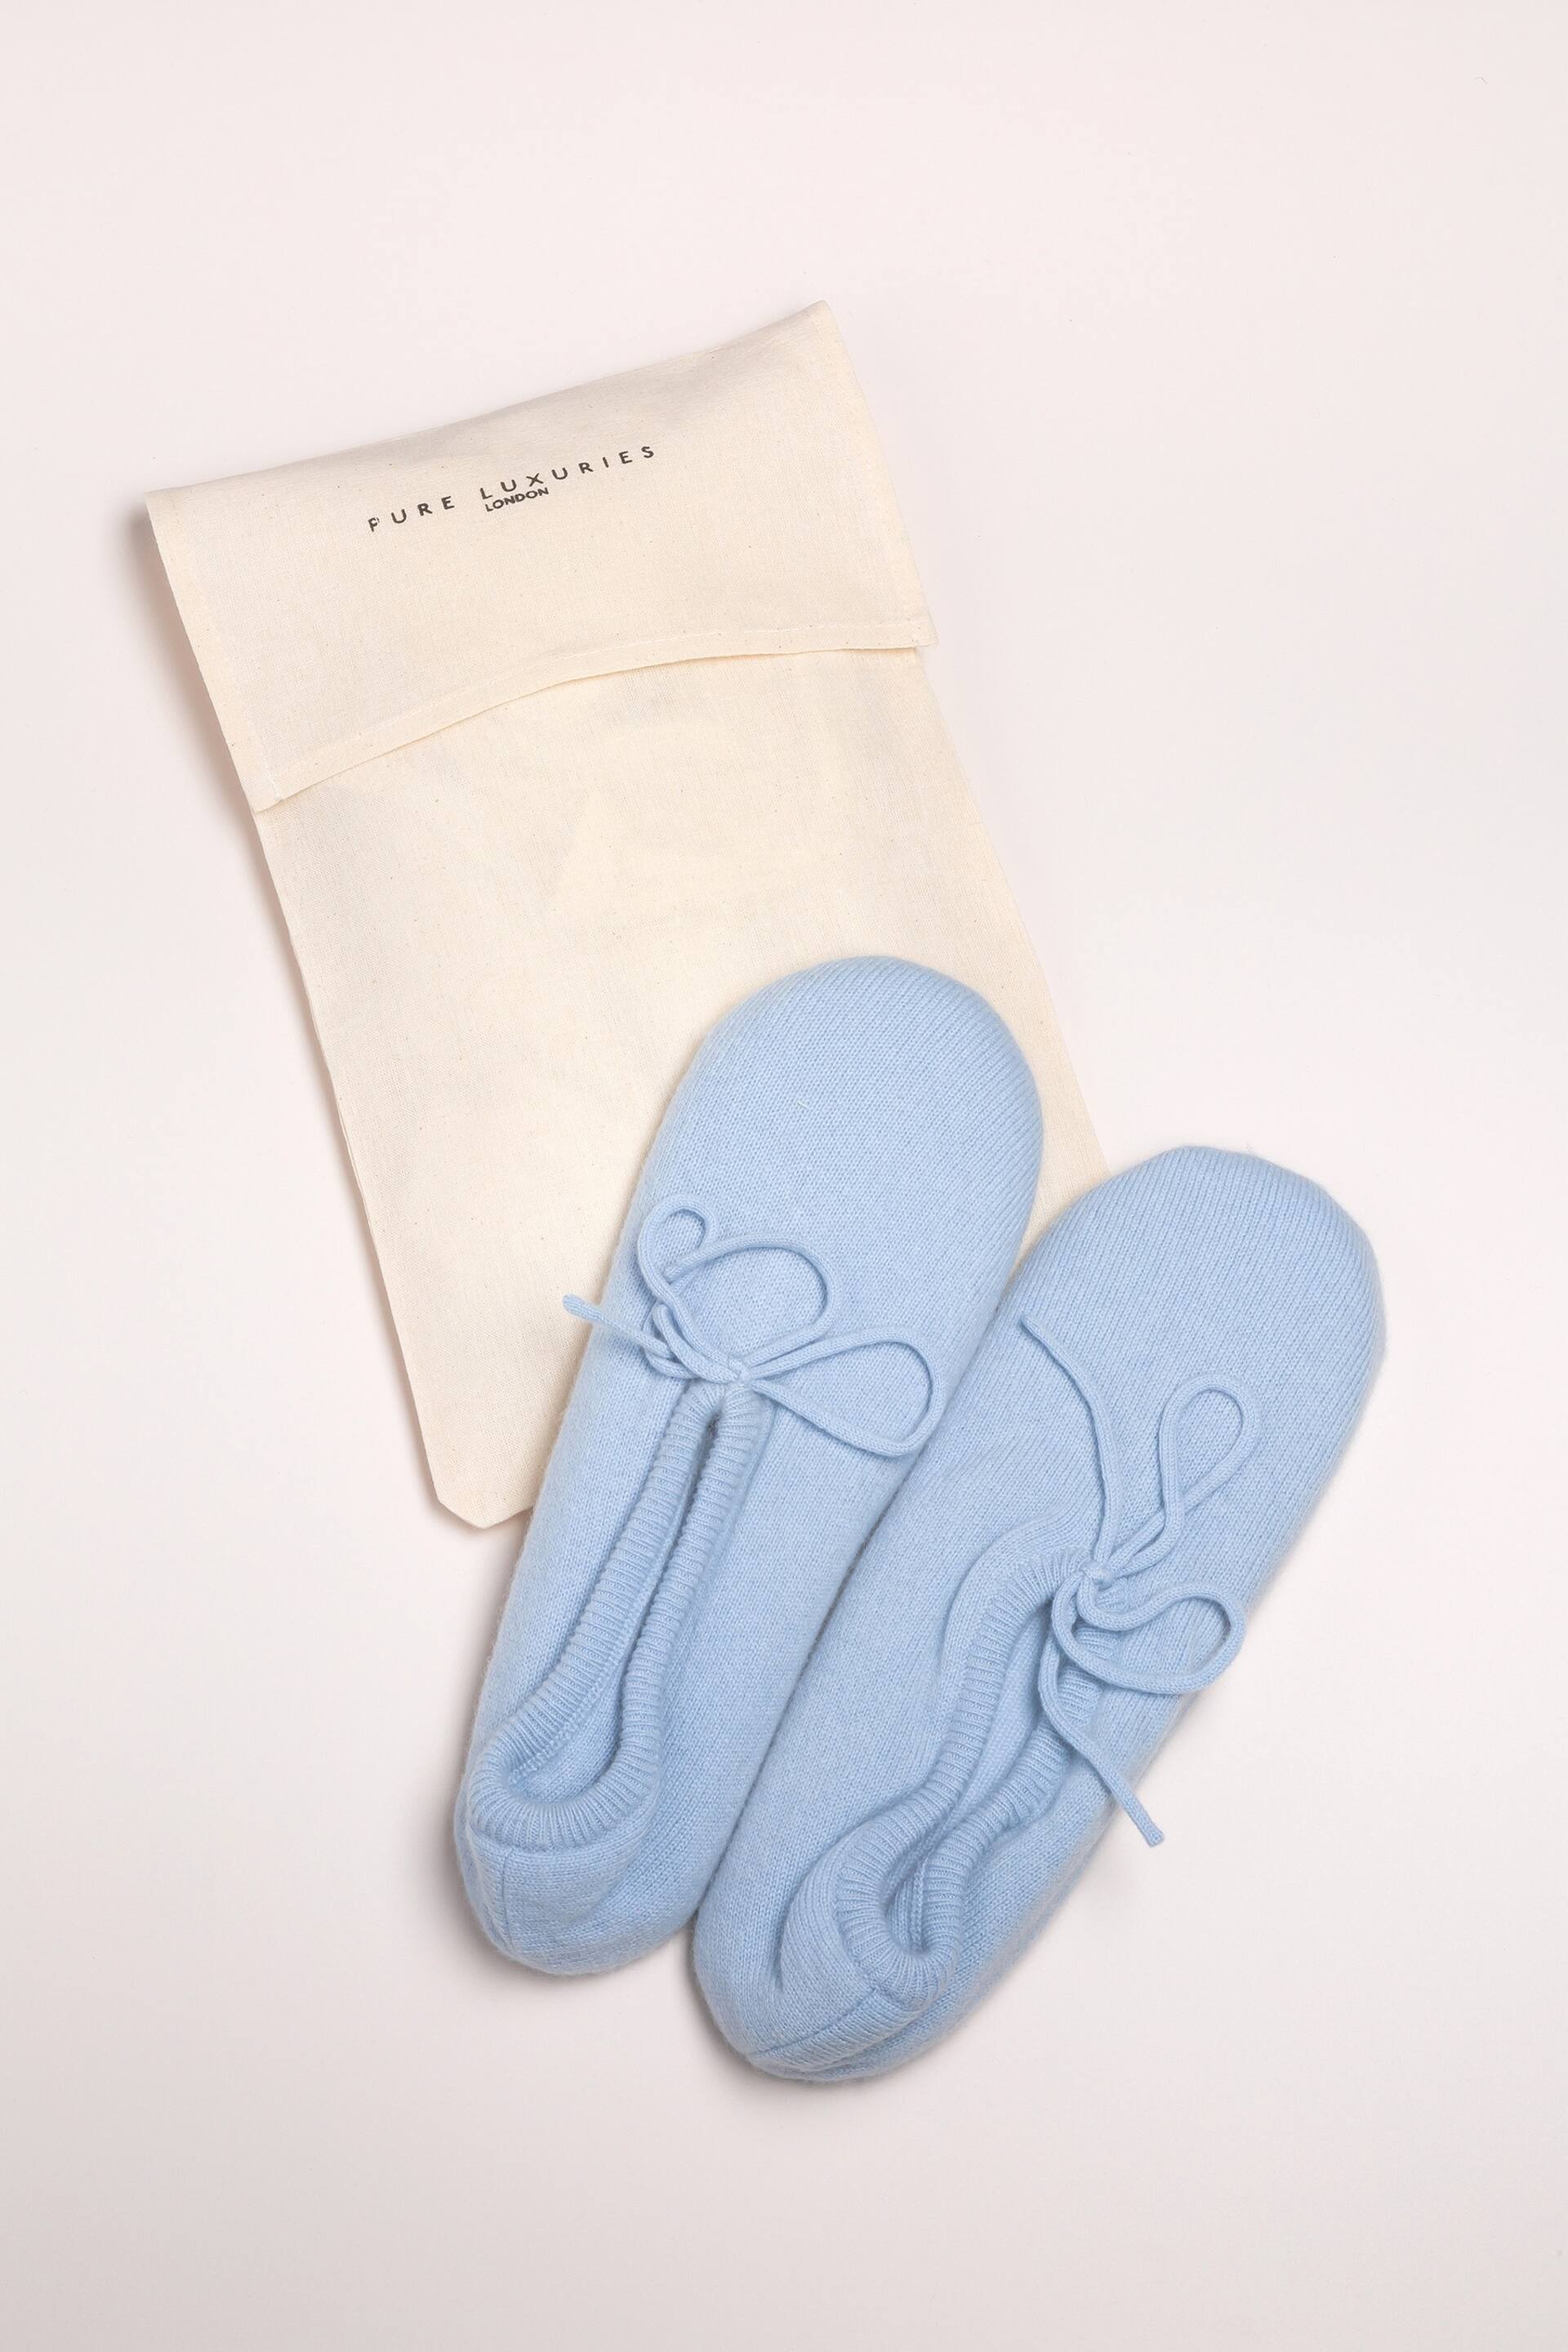 Pure Luxuries London Millom Cashmere & Merino Wool Slippers - Image 5 of 5